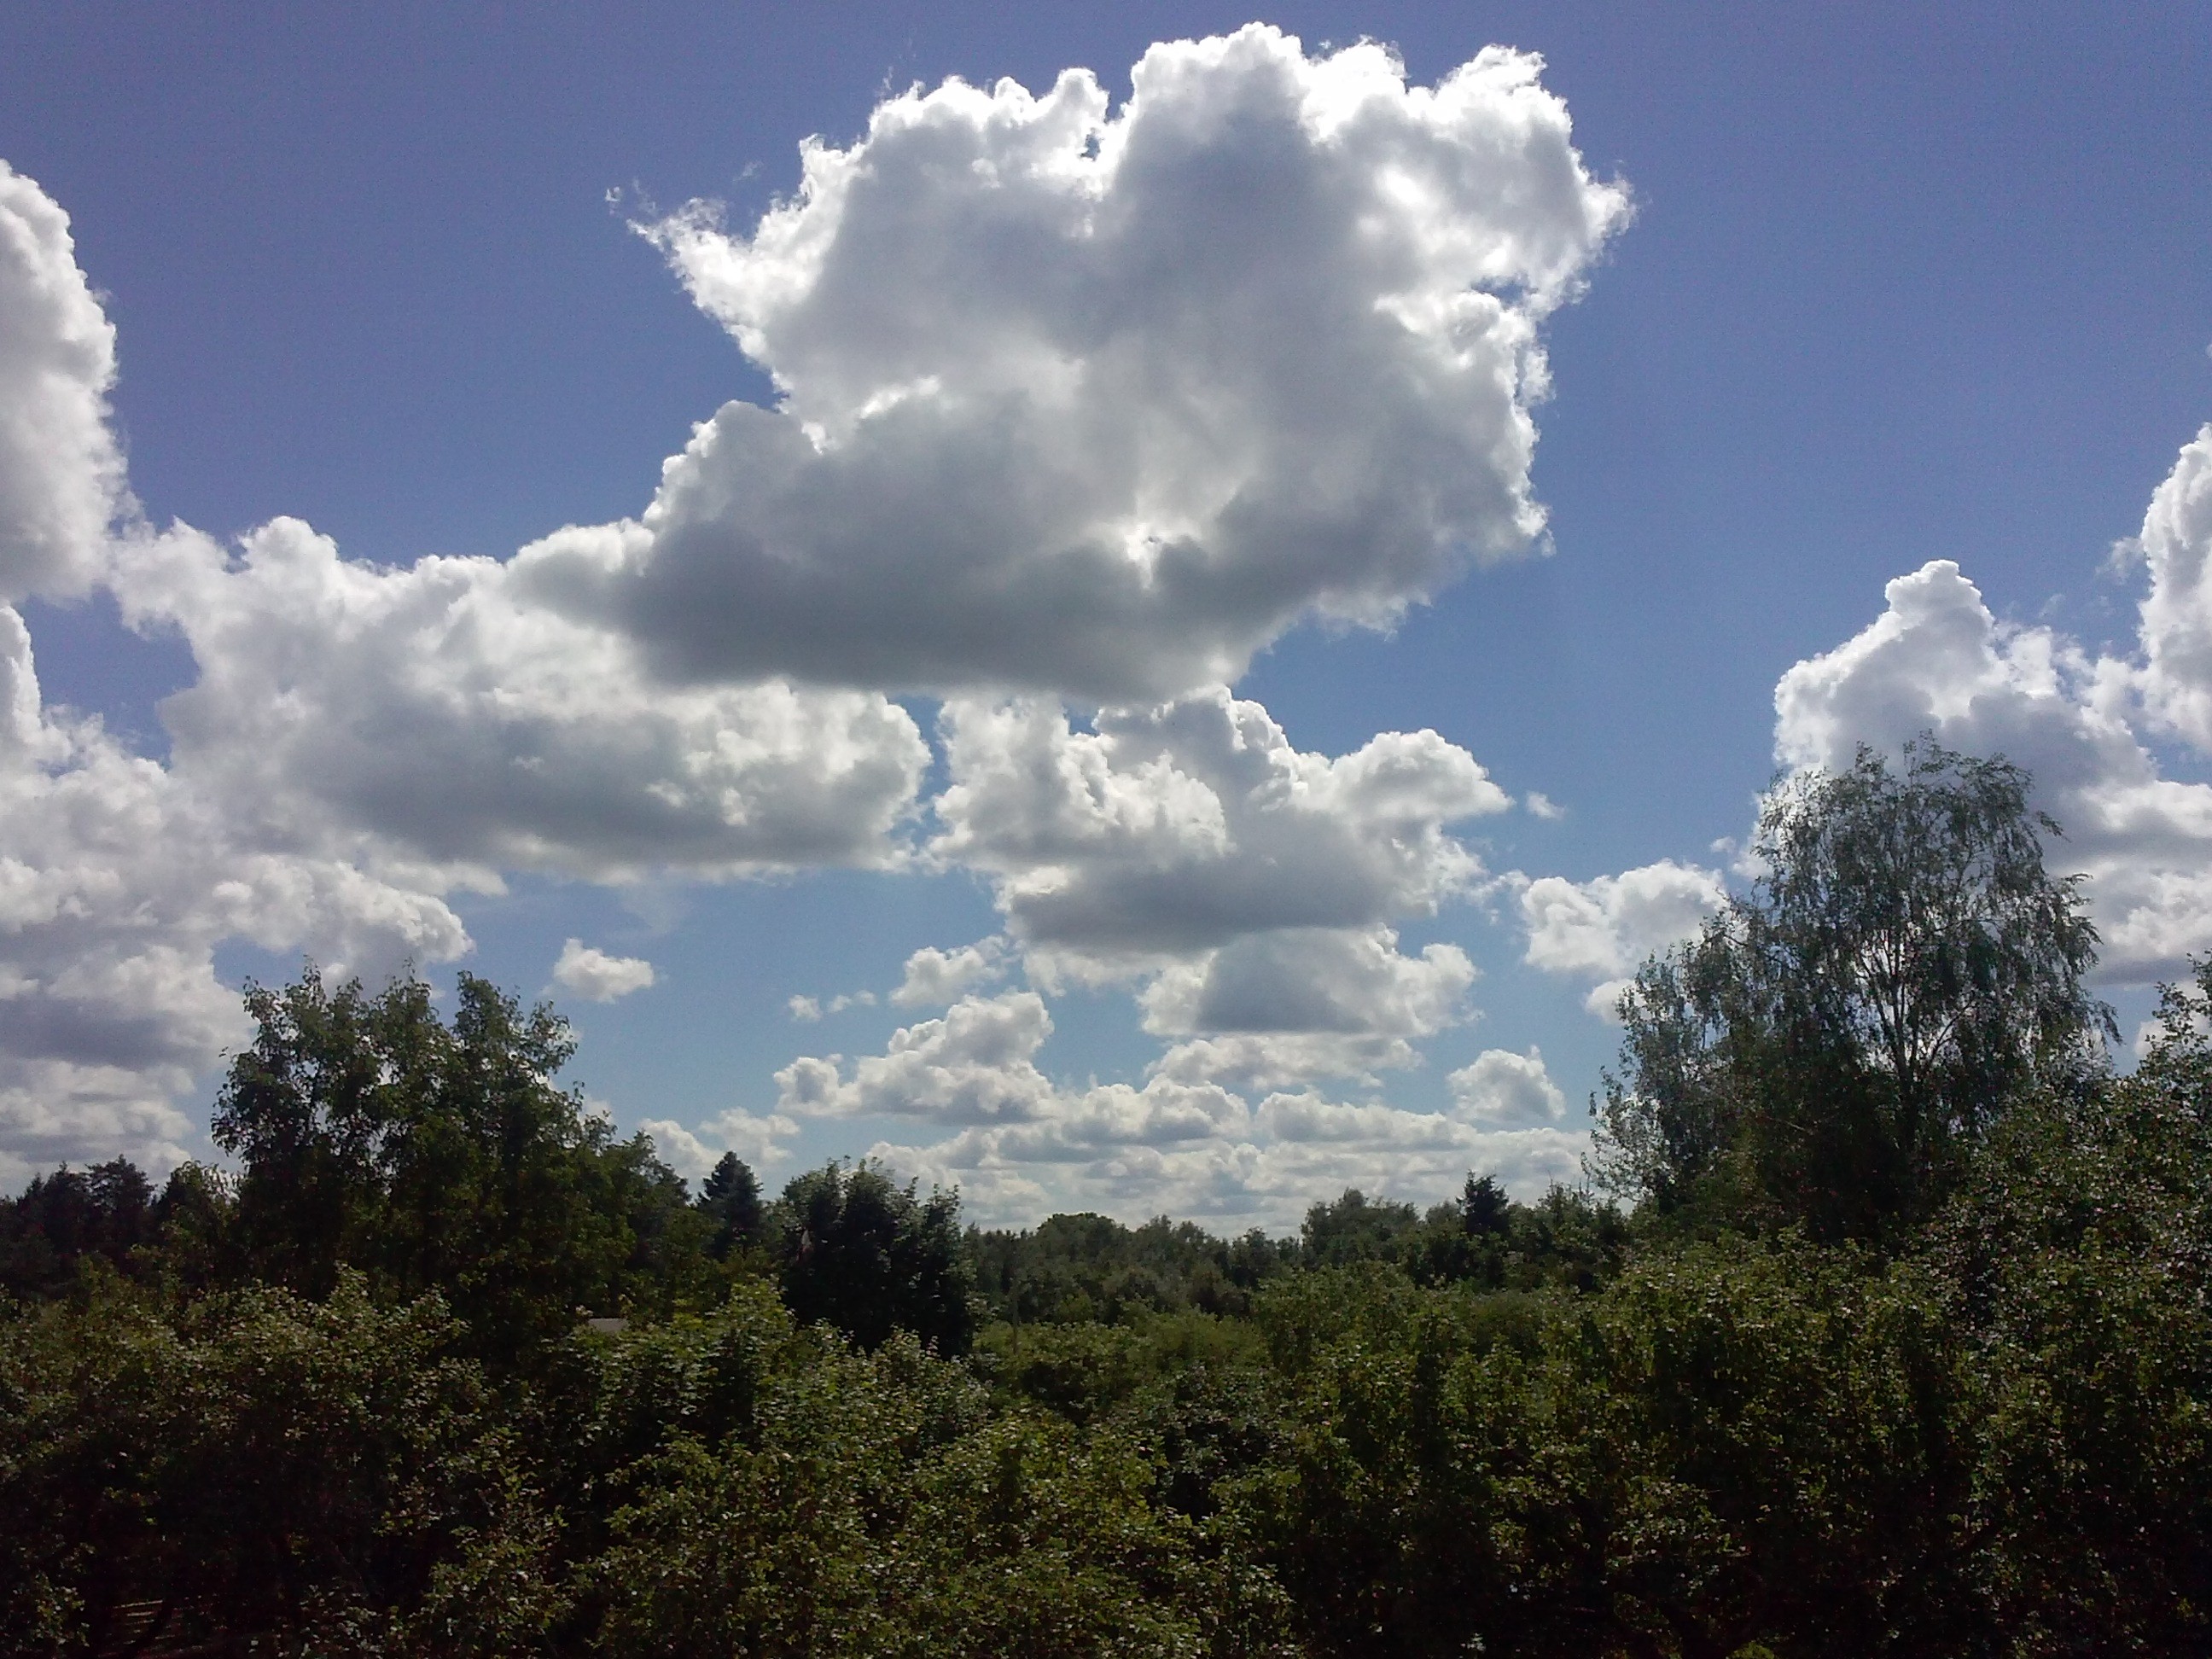 General 2592x1944 nature landscape trees summer sky clouds